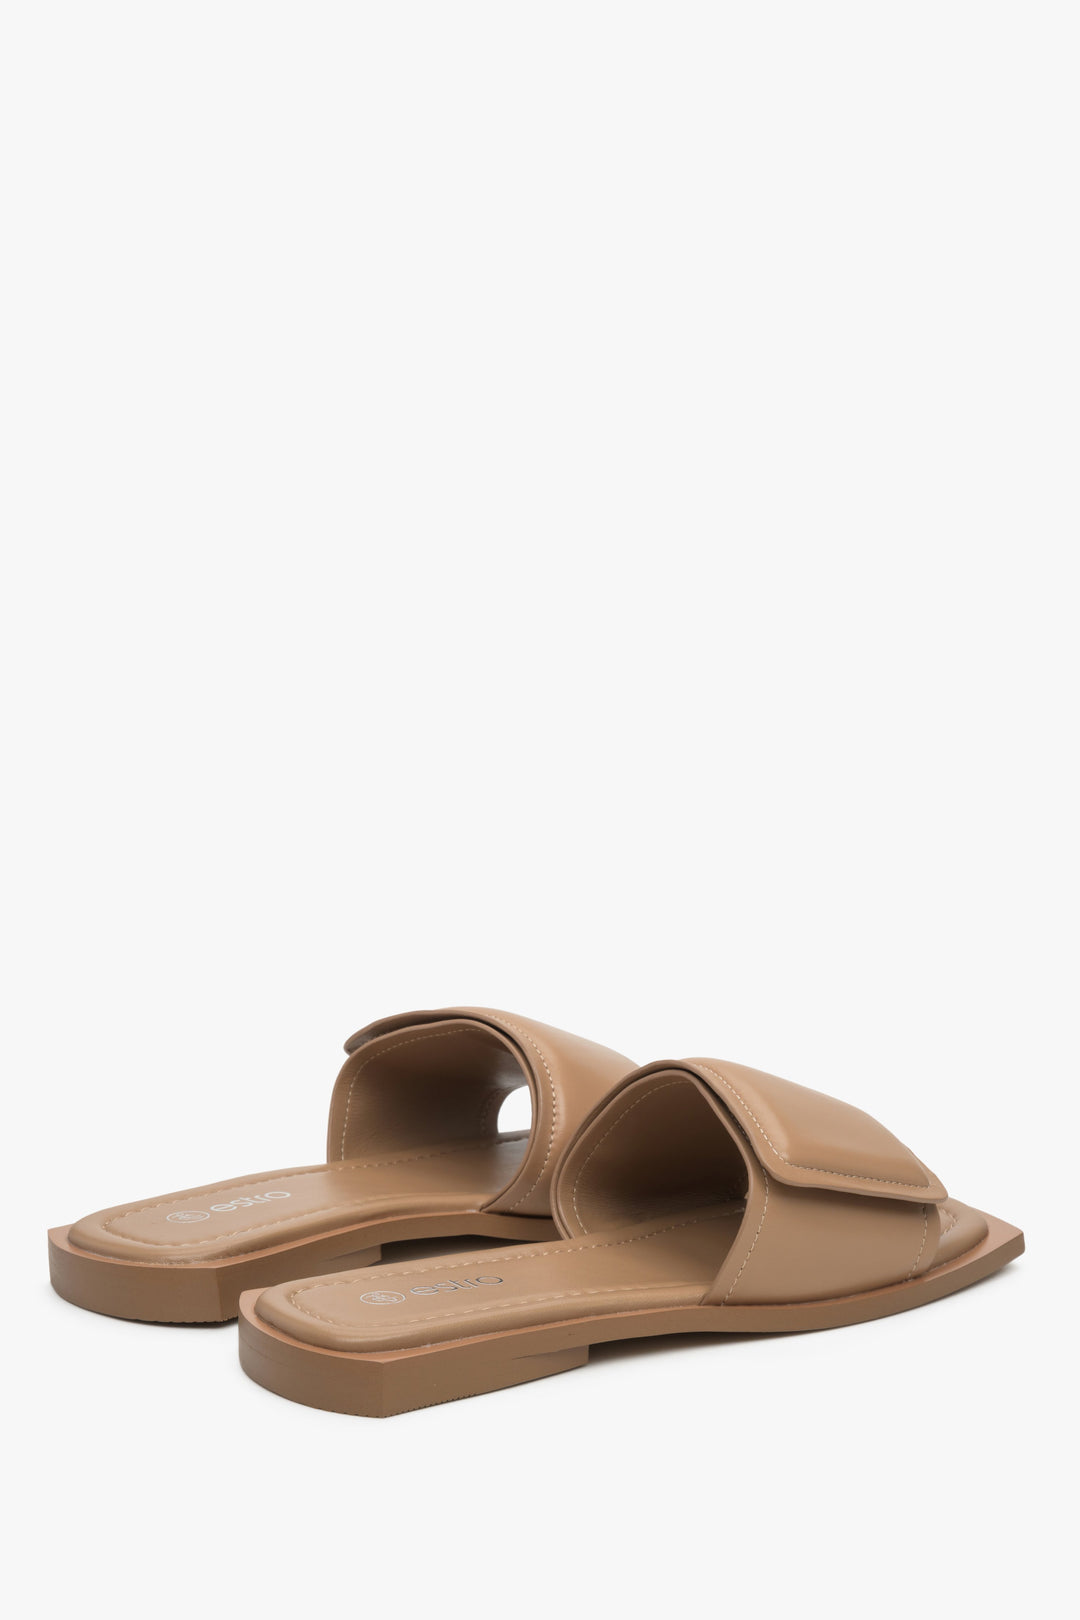 Estro women's slide sandals in brown with hook and loop fastening - close-up on shoe sideline.